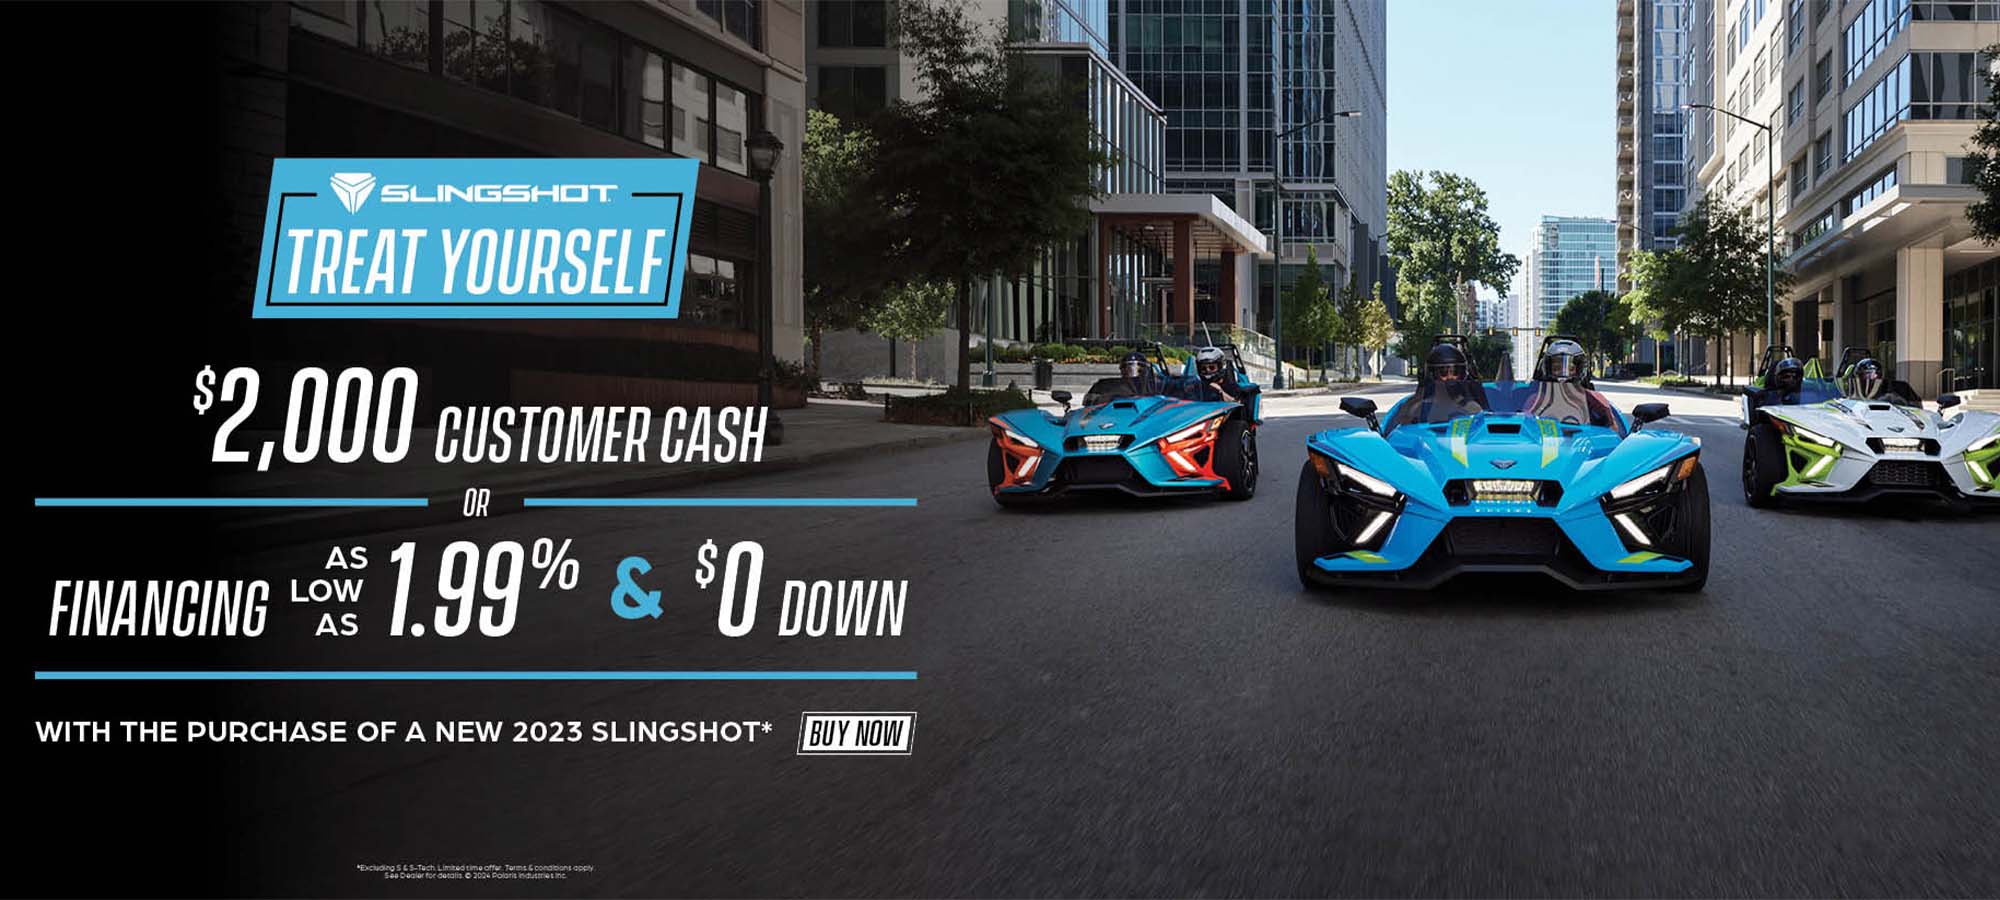 Slingshot US - March Promo at Friendly Powersports Slidell